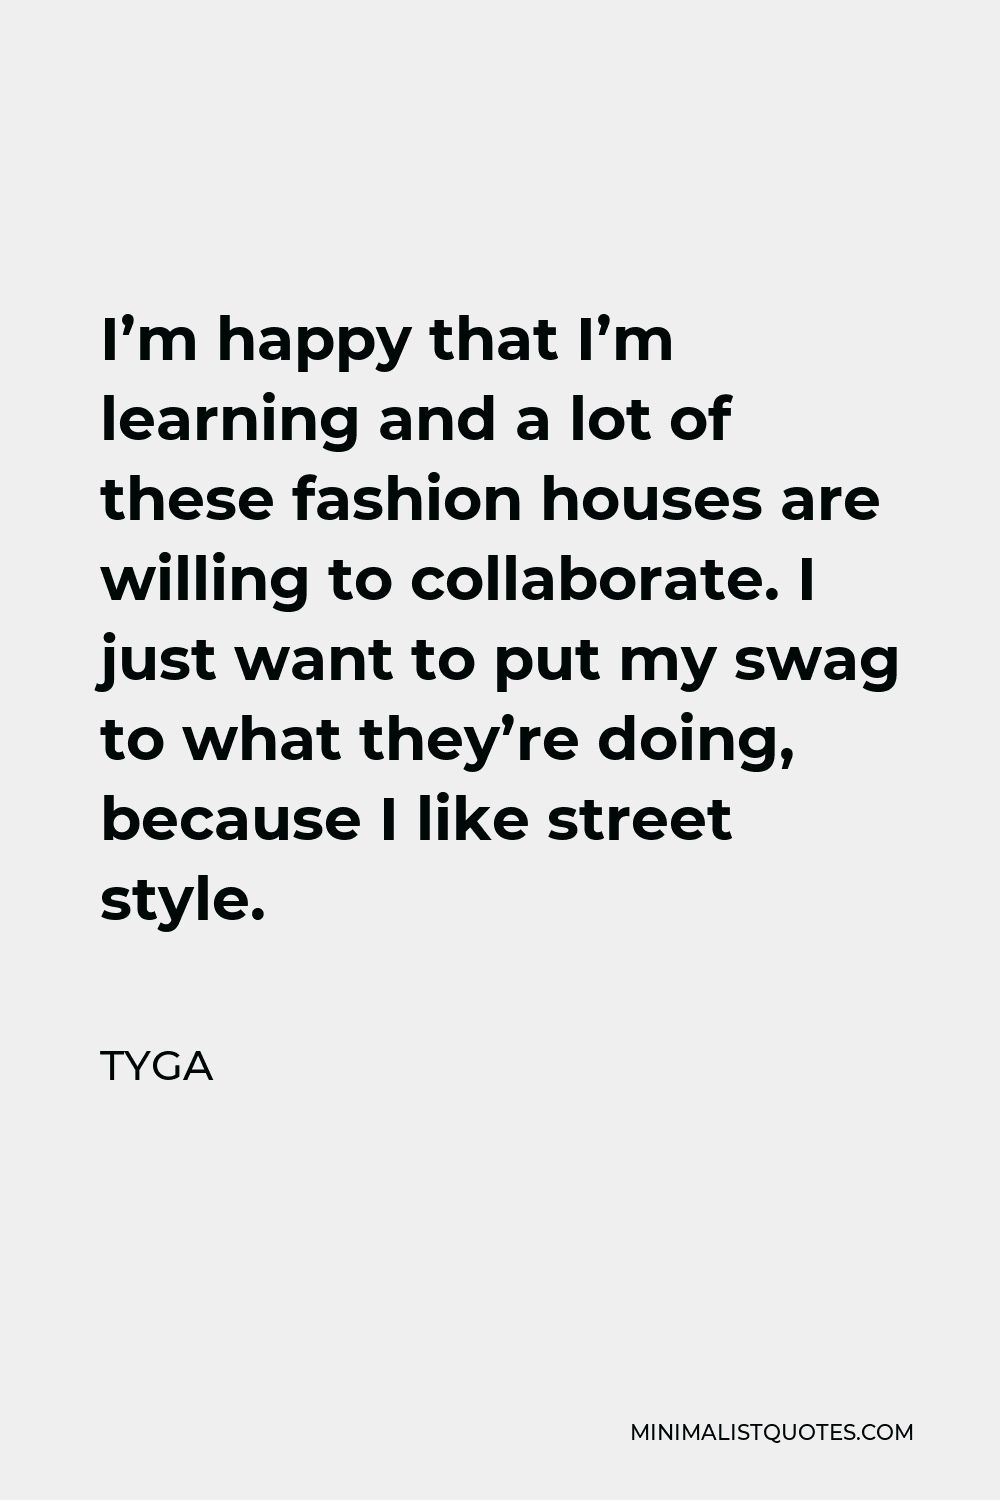 Tyga Quote - I’m happy that I’m learning and a lot of these fashion houses are willing to collaborate. I just want to put my swag to what they’re doing, because I like street style.